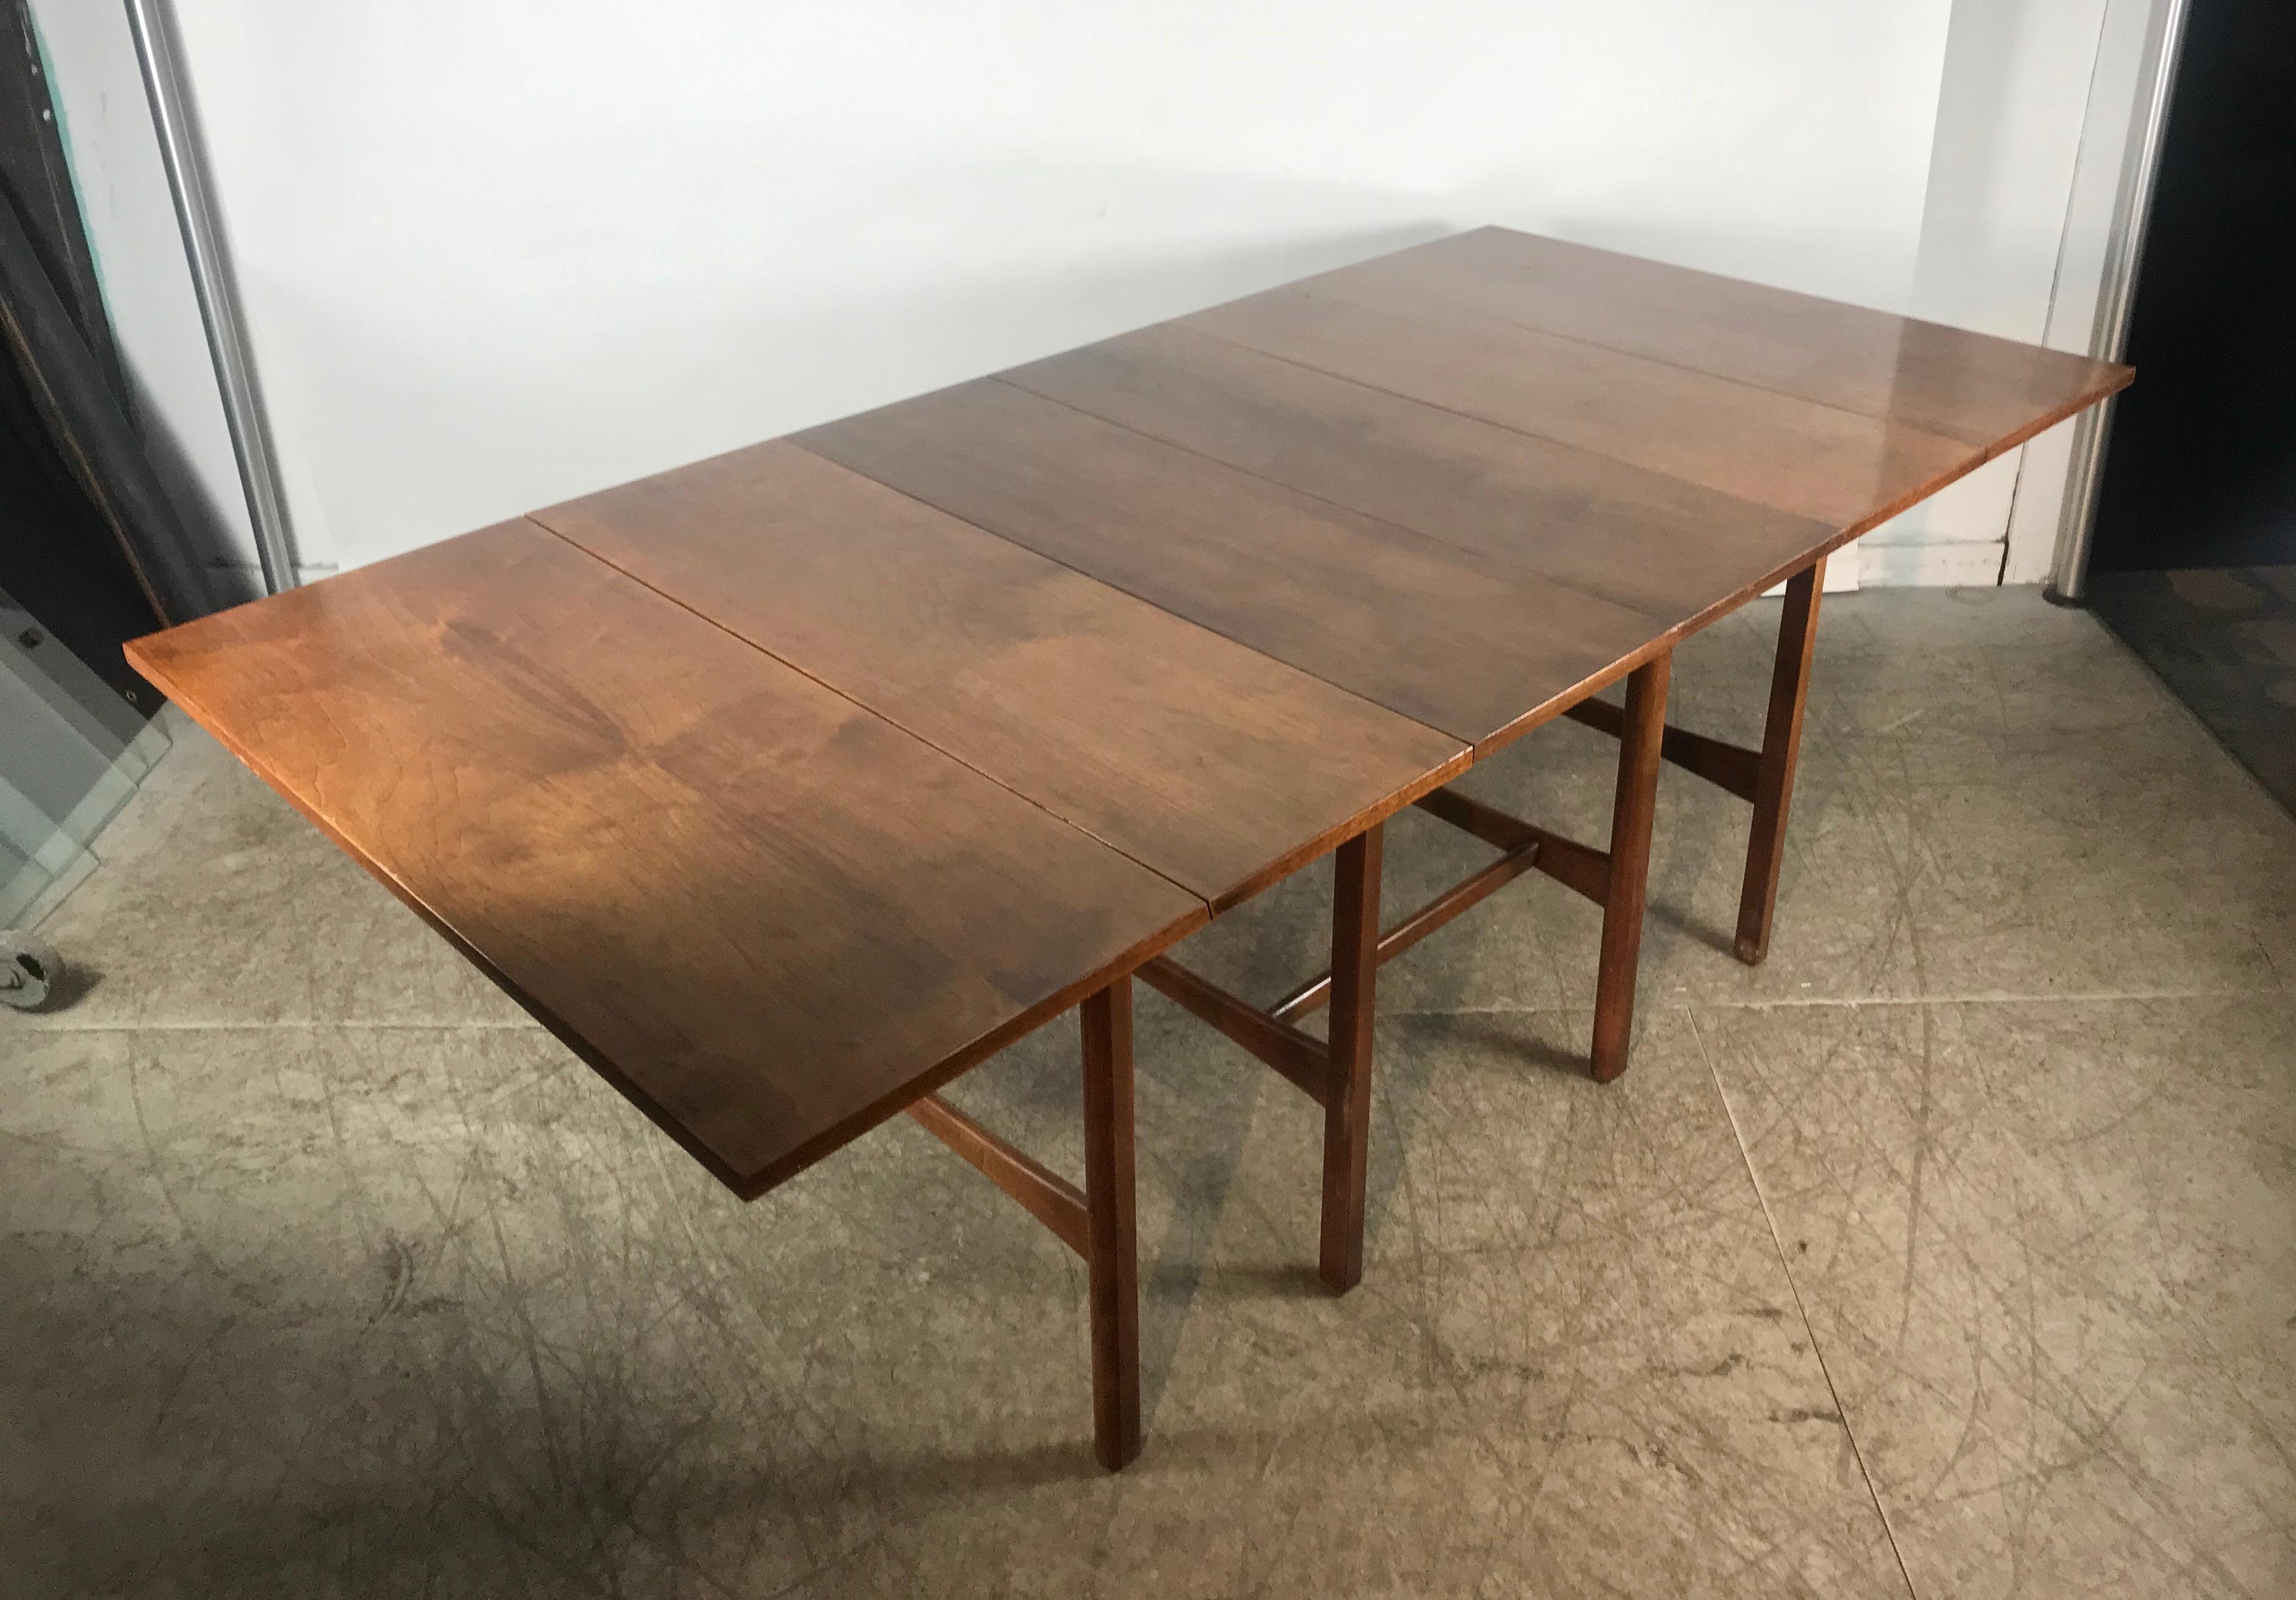 Modernist walnut dining table, Merton Gershun for American of Martinsville. Stunning dining table. Smart,versatile design. Perfect space saver. Totally closed measures 40